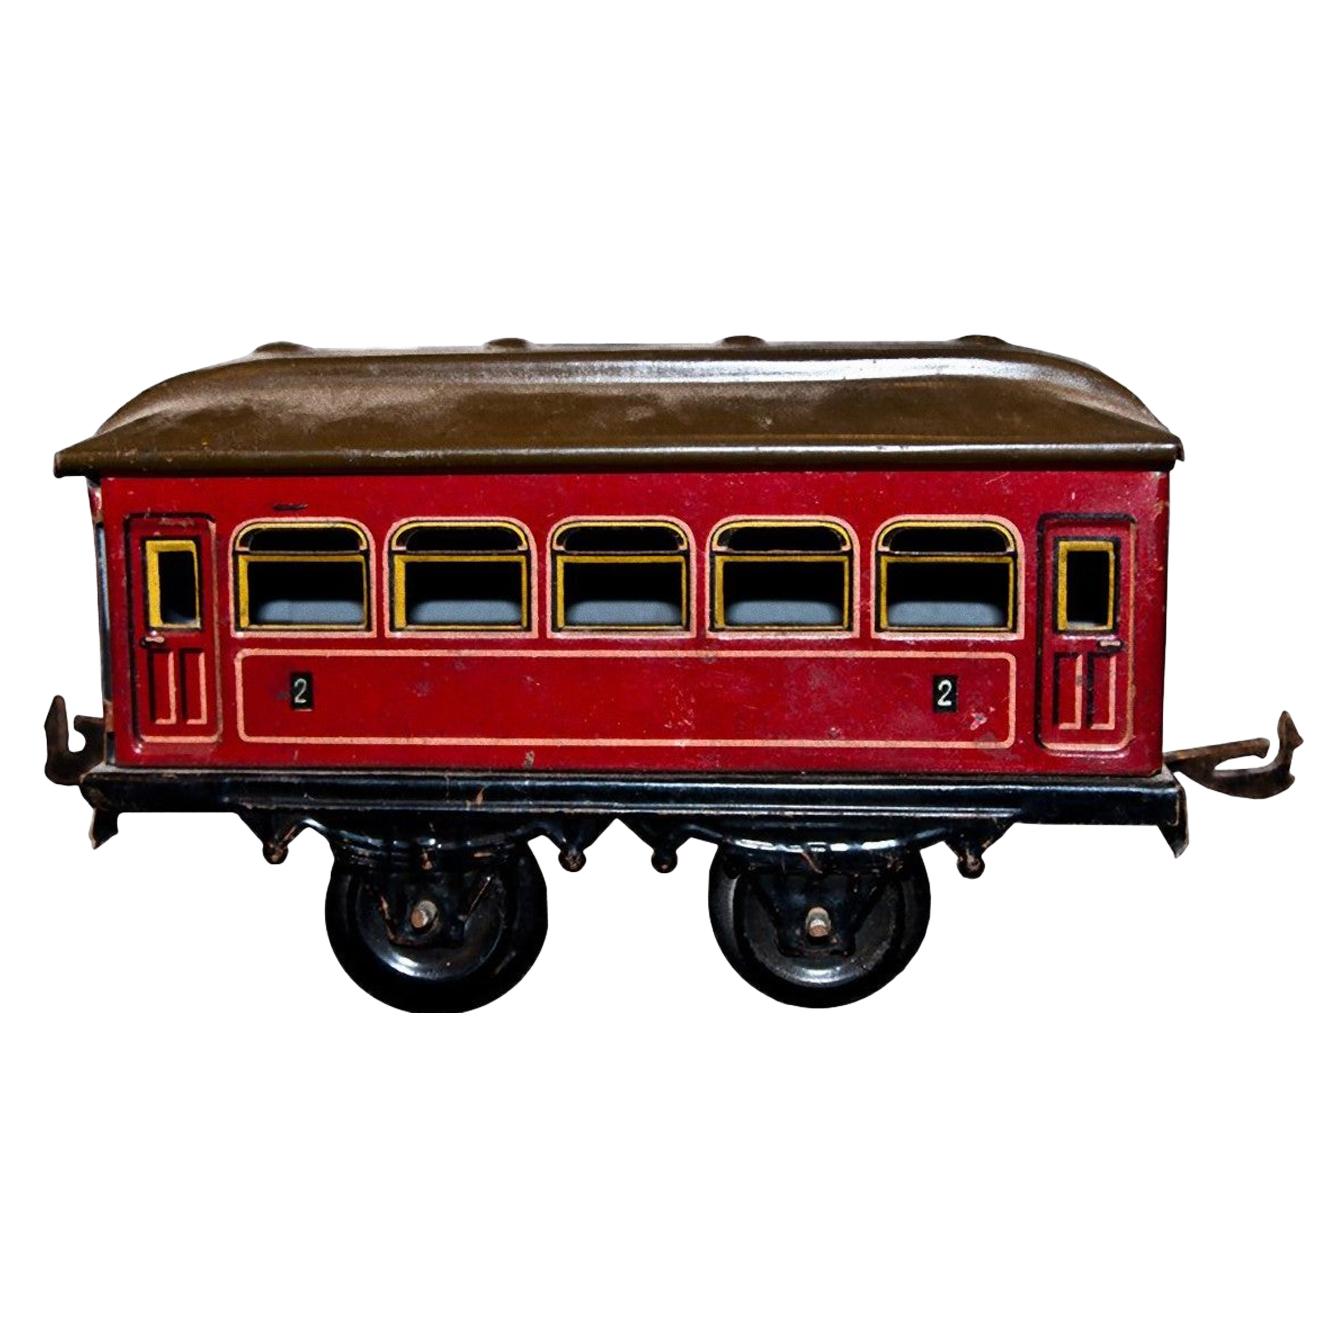 Vintage Toy, Karl Bub 7-Window Passenger Coach, Made in Germany For Sale